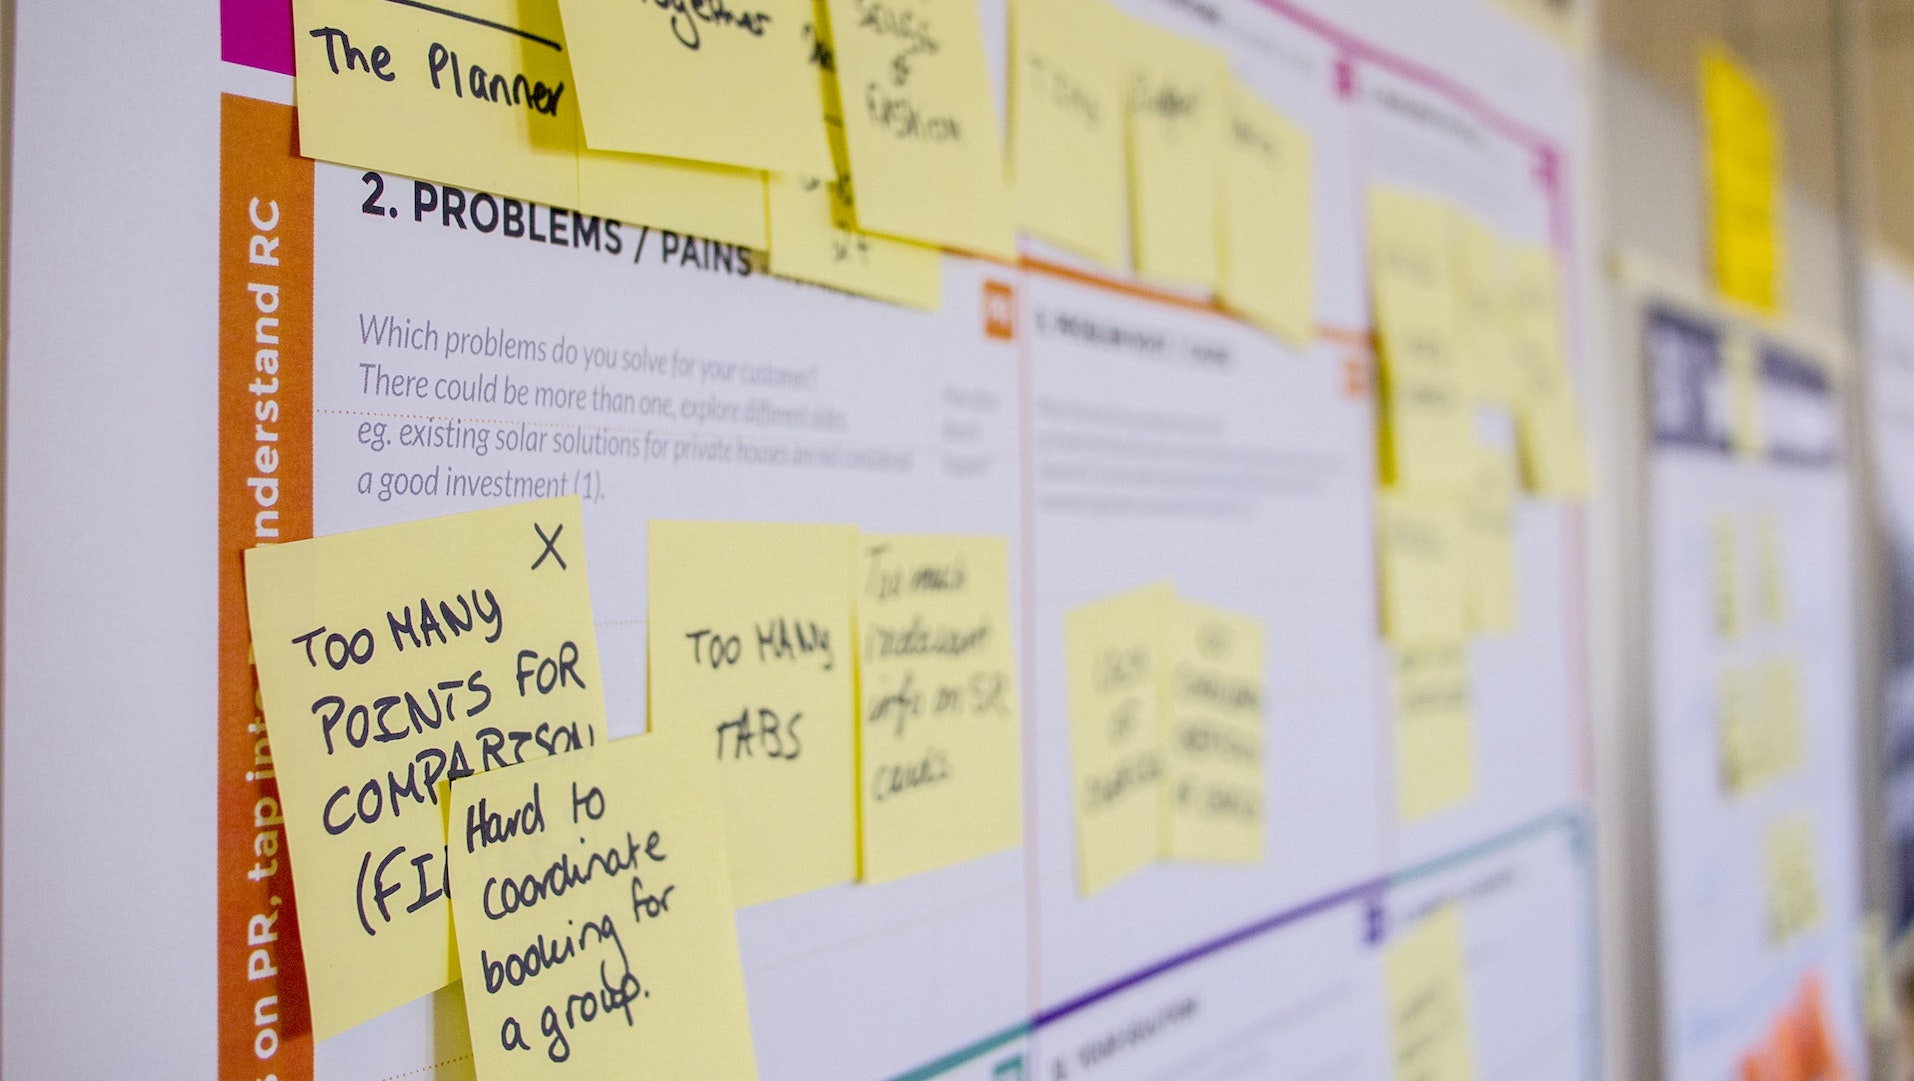 Sticky notes fill a square with text: Problems/pains. 